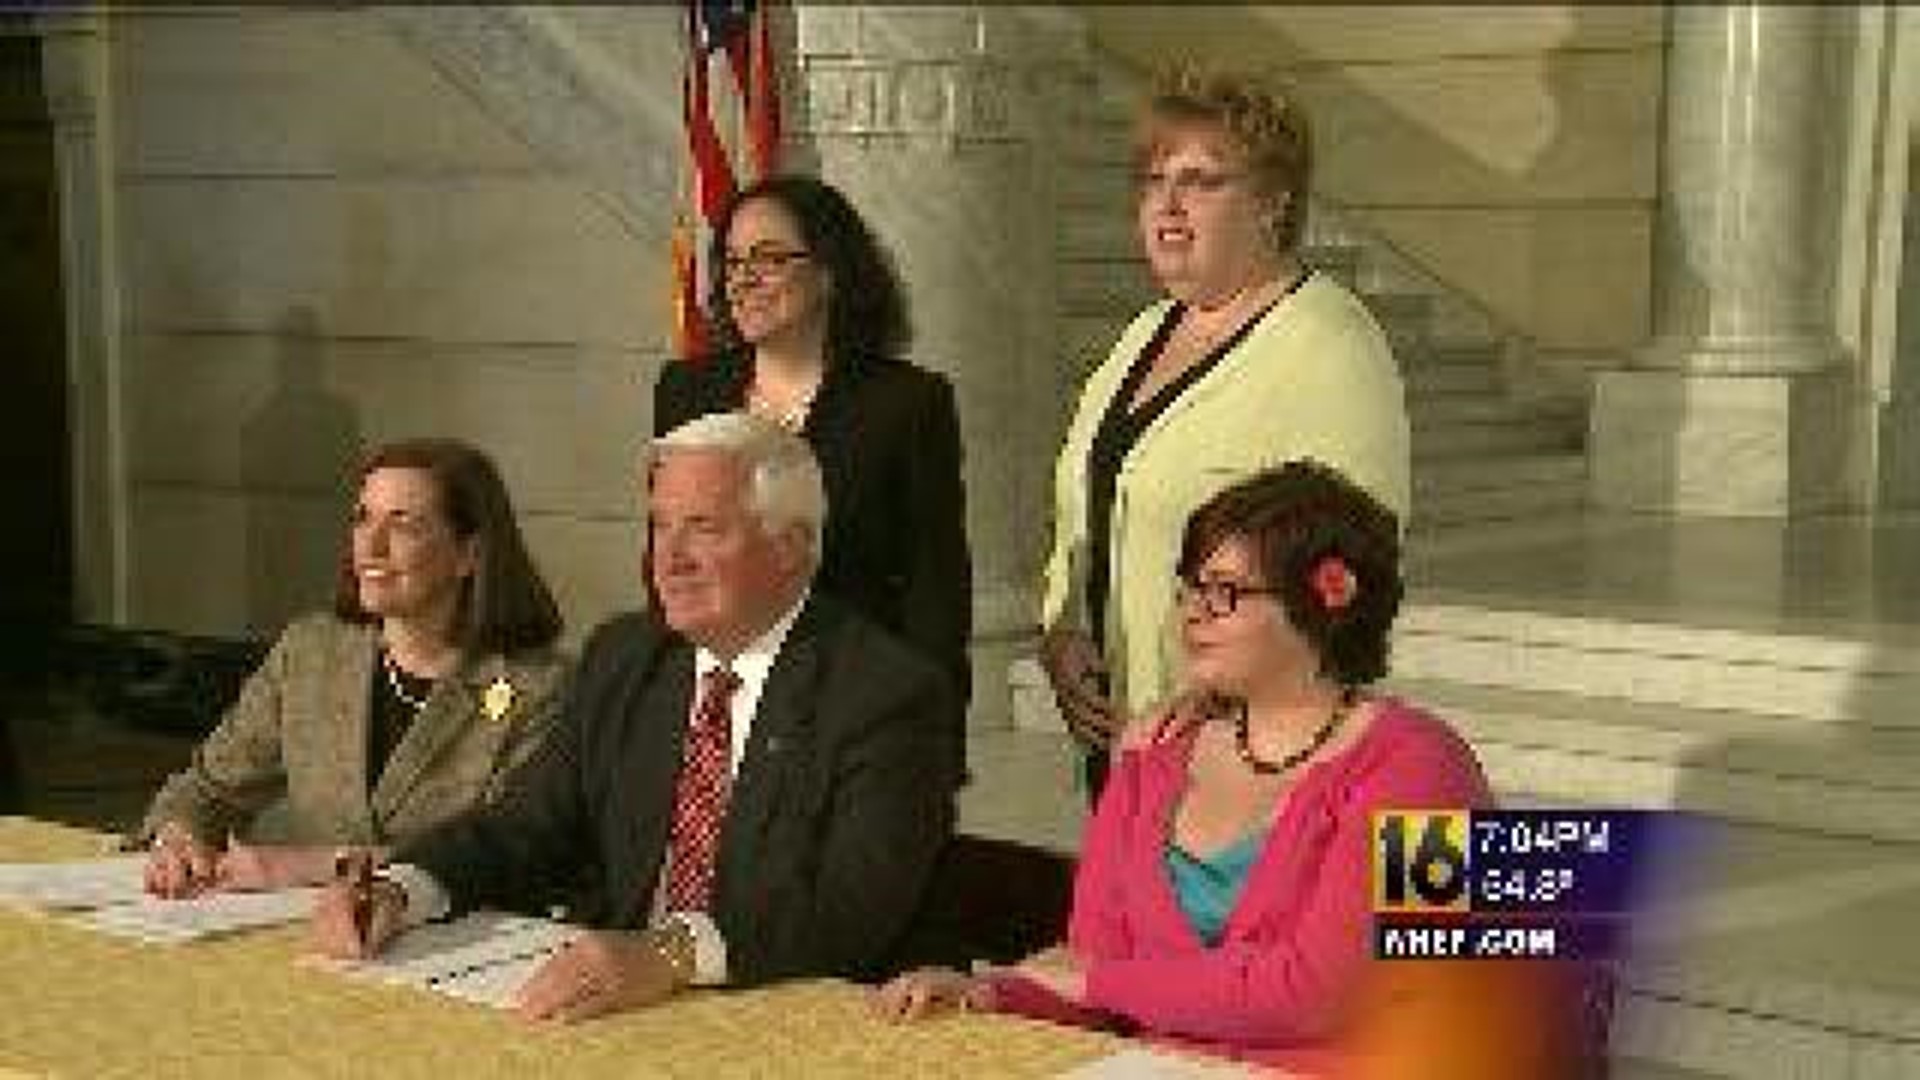 Governor Signs Juvenile Justice Laws in Luzerne County